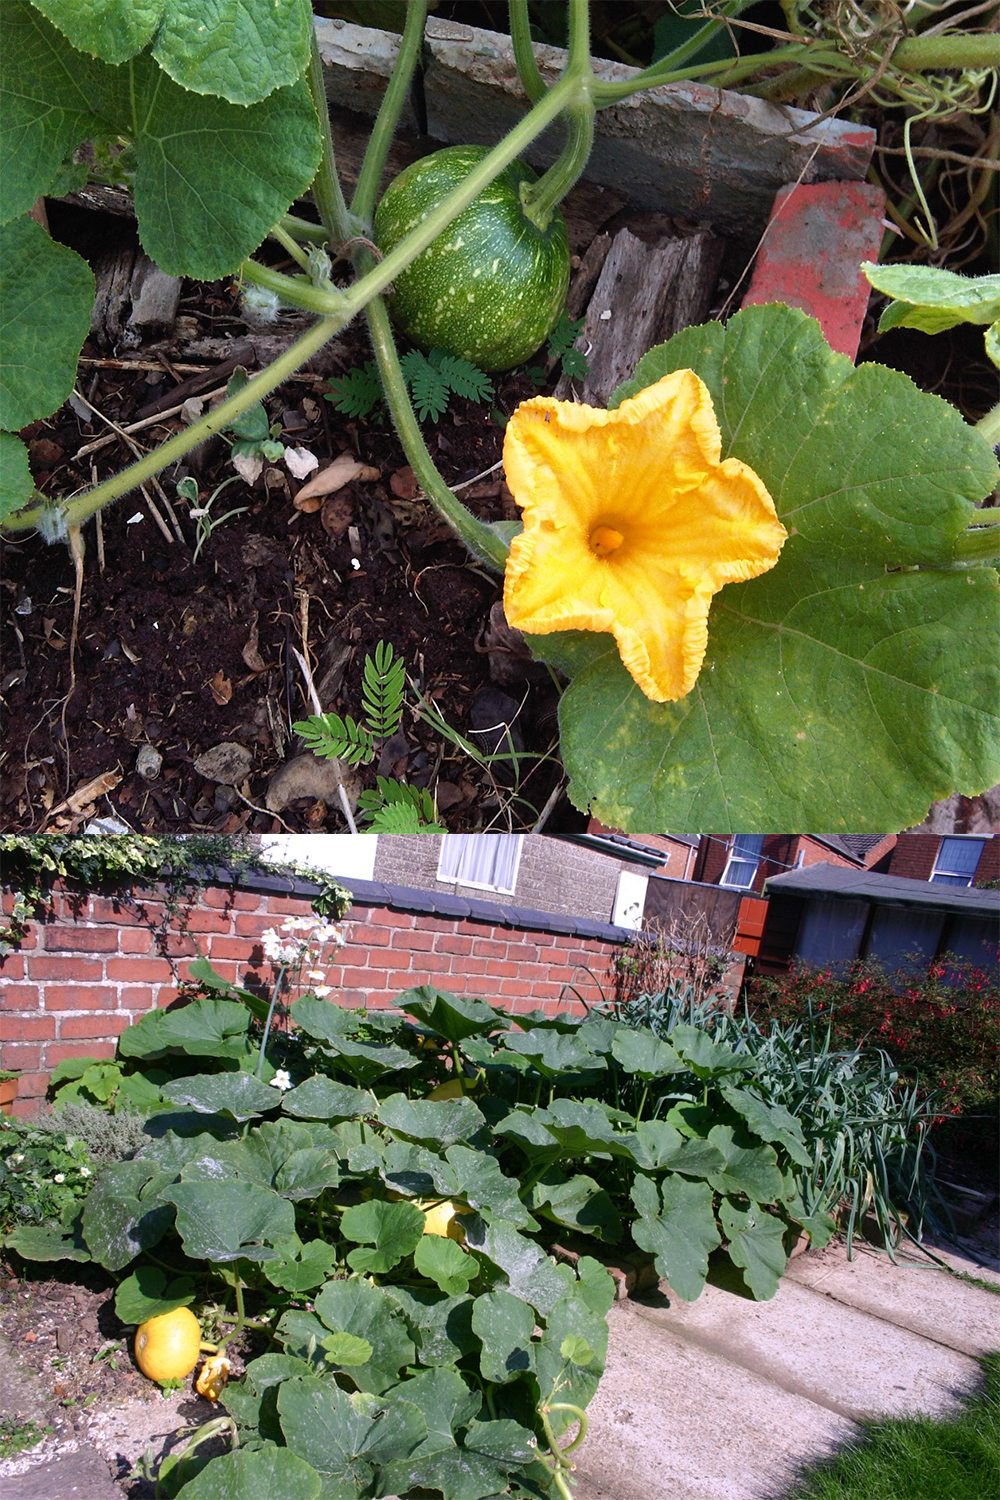 How to Grow Pumpkins in Pots – An Ultimate Guide to Grow Pumpkins in Containers